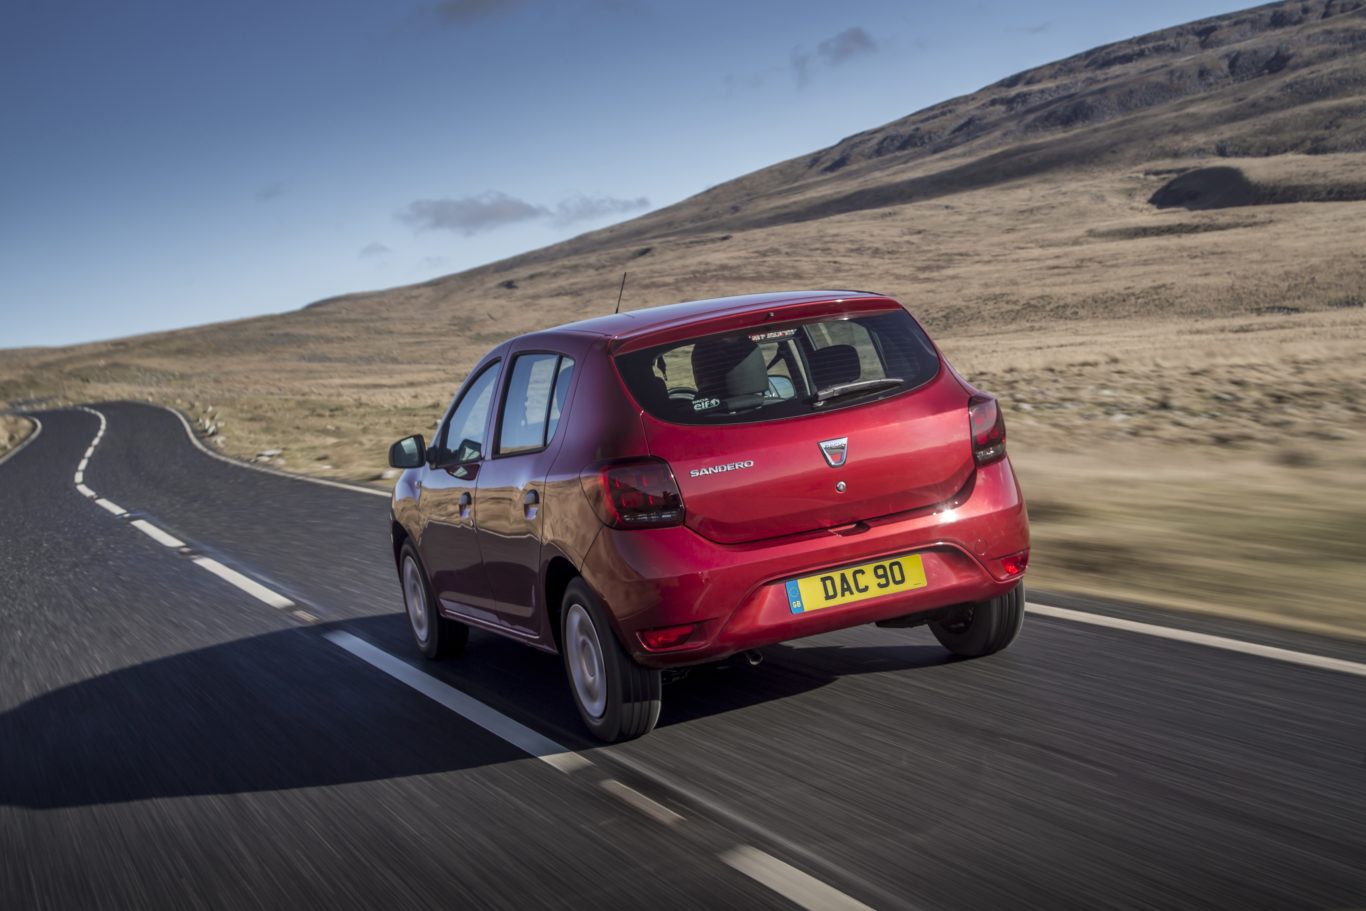 Despite its price, the Sandero has decent on-road manners